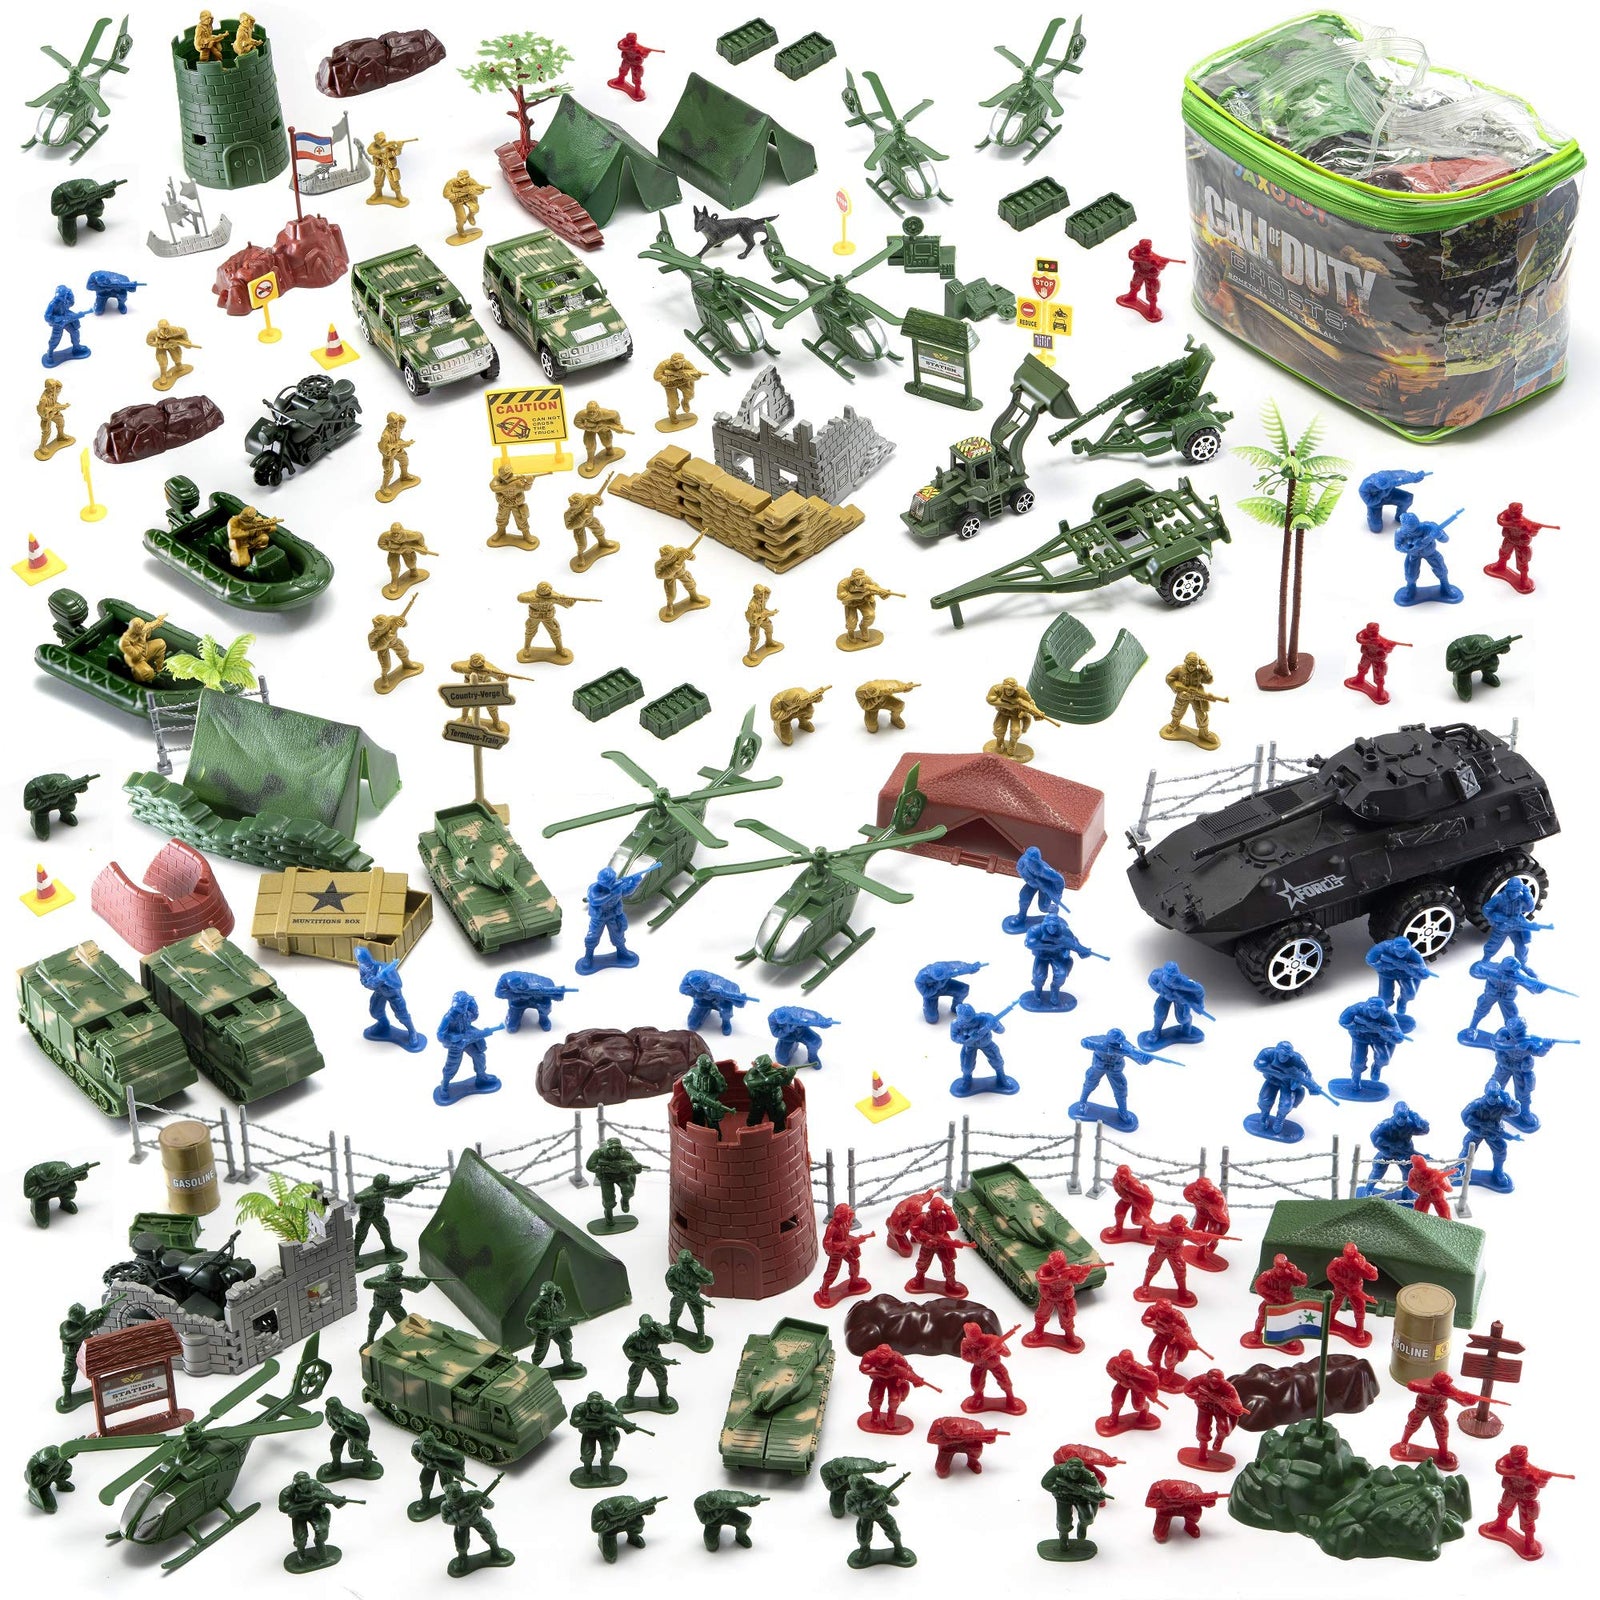 JaxoJoy 200-Piece Army Men Military Set - Cool Mini Action Figure Play Set w/ Soldiers, Vehicles, Aircraft & Boats - Pretend WWII Army Base & Military Toy Figurines for Boys